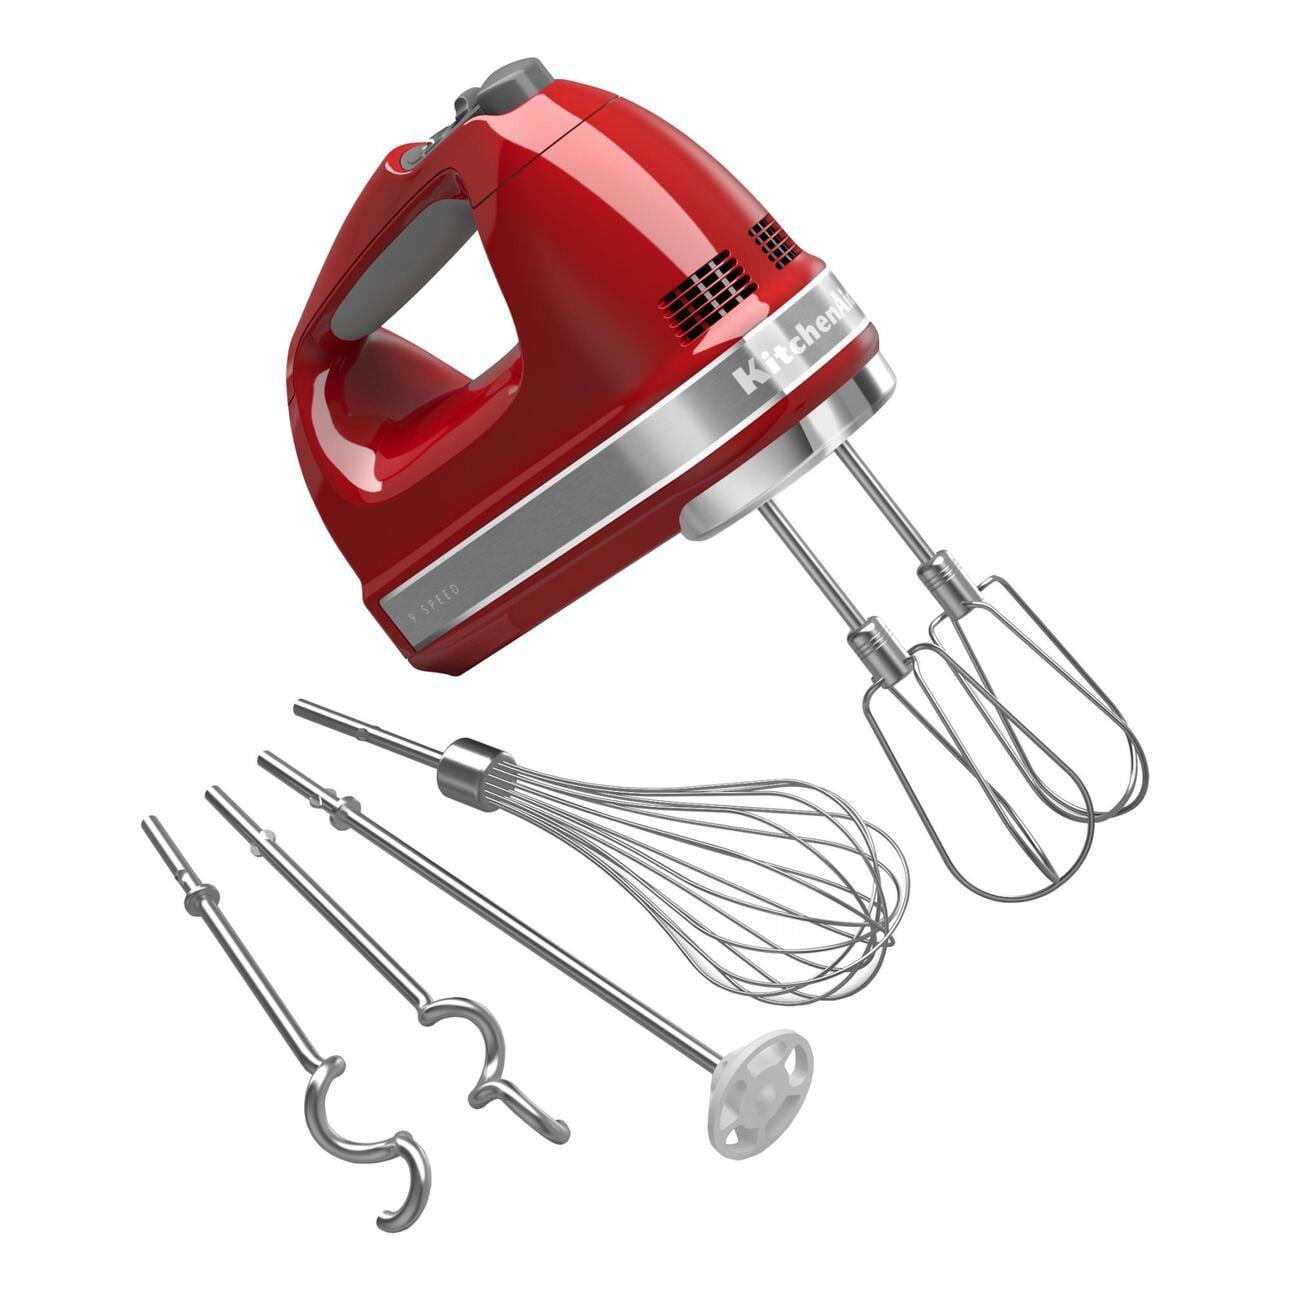 KitchenAid deals live from $9 including Cordless Hand Mixer at $60 (Reg.  $100) + more